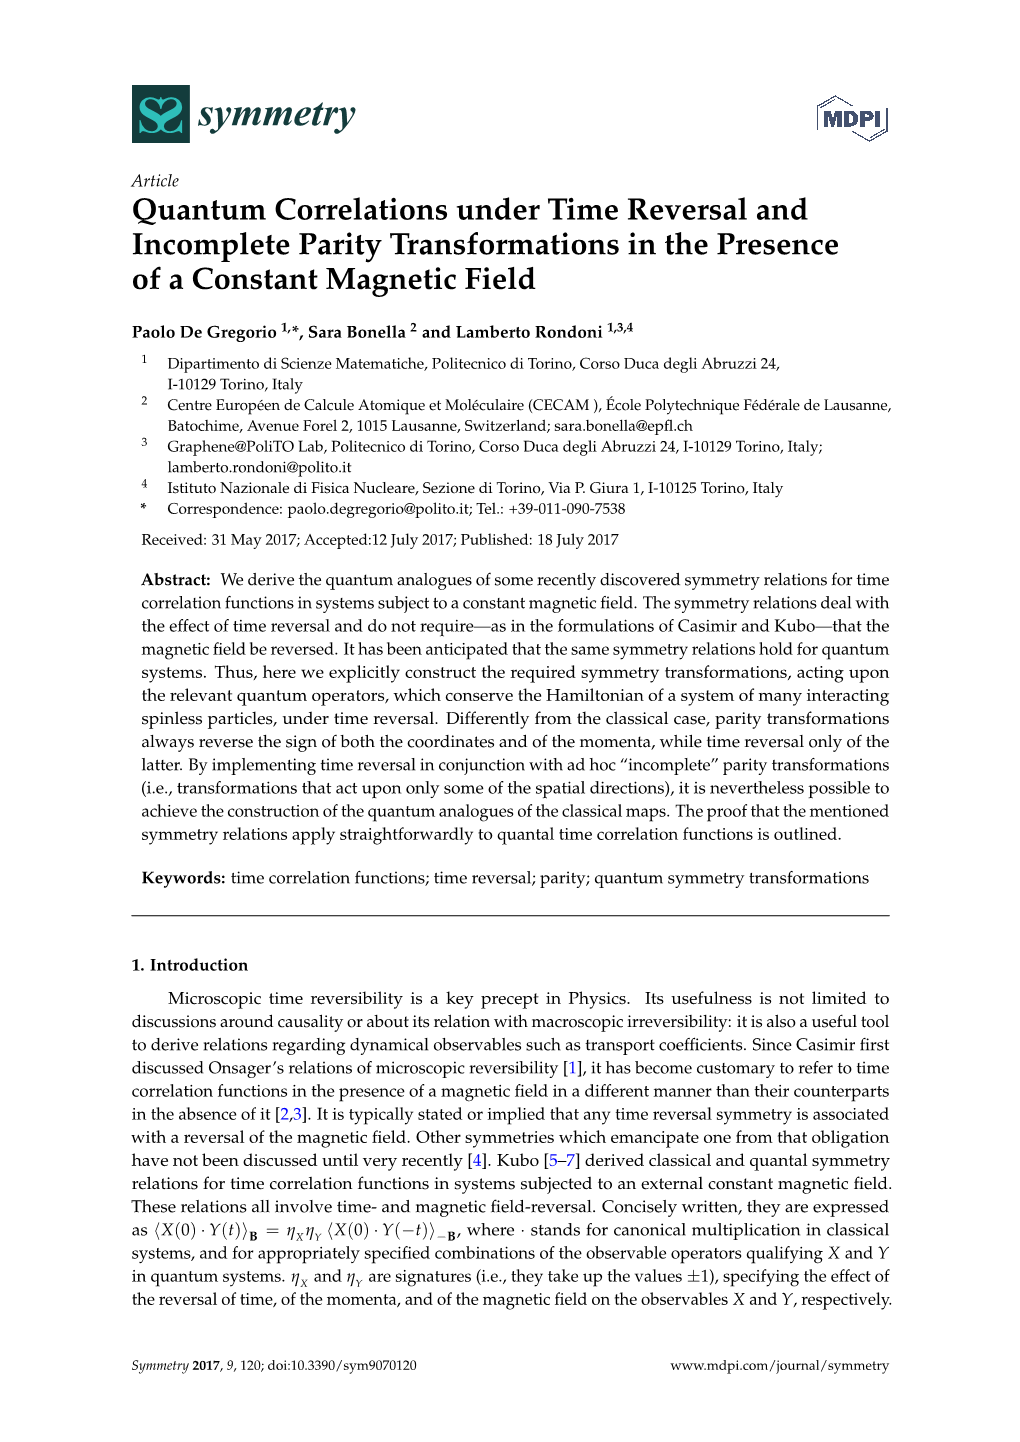 Quantum Correlations Under Time Reversal and Incomplete Parity Transformations in the Presence of a Constant Magnetic Field